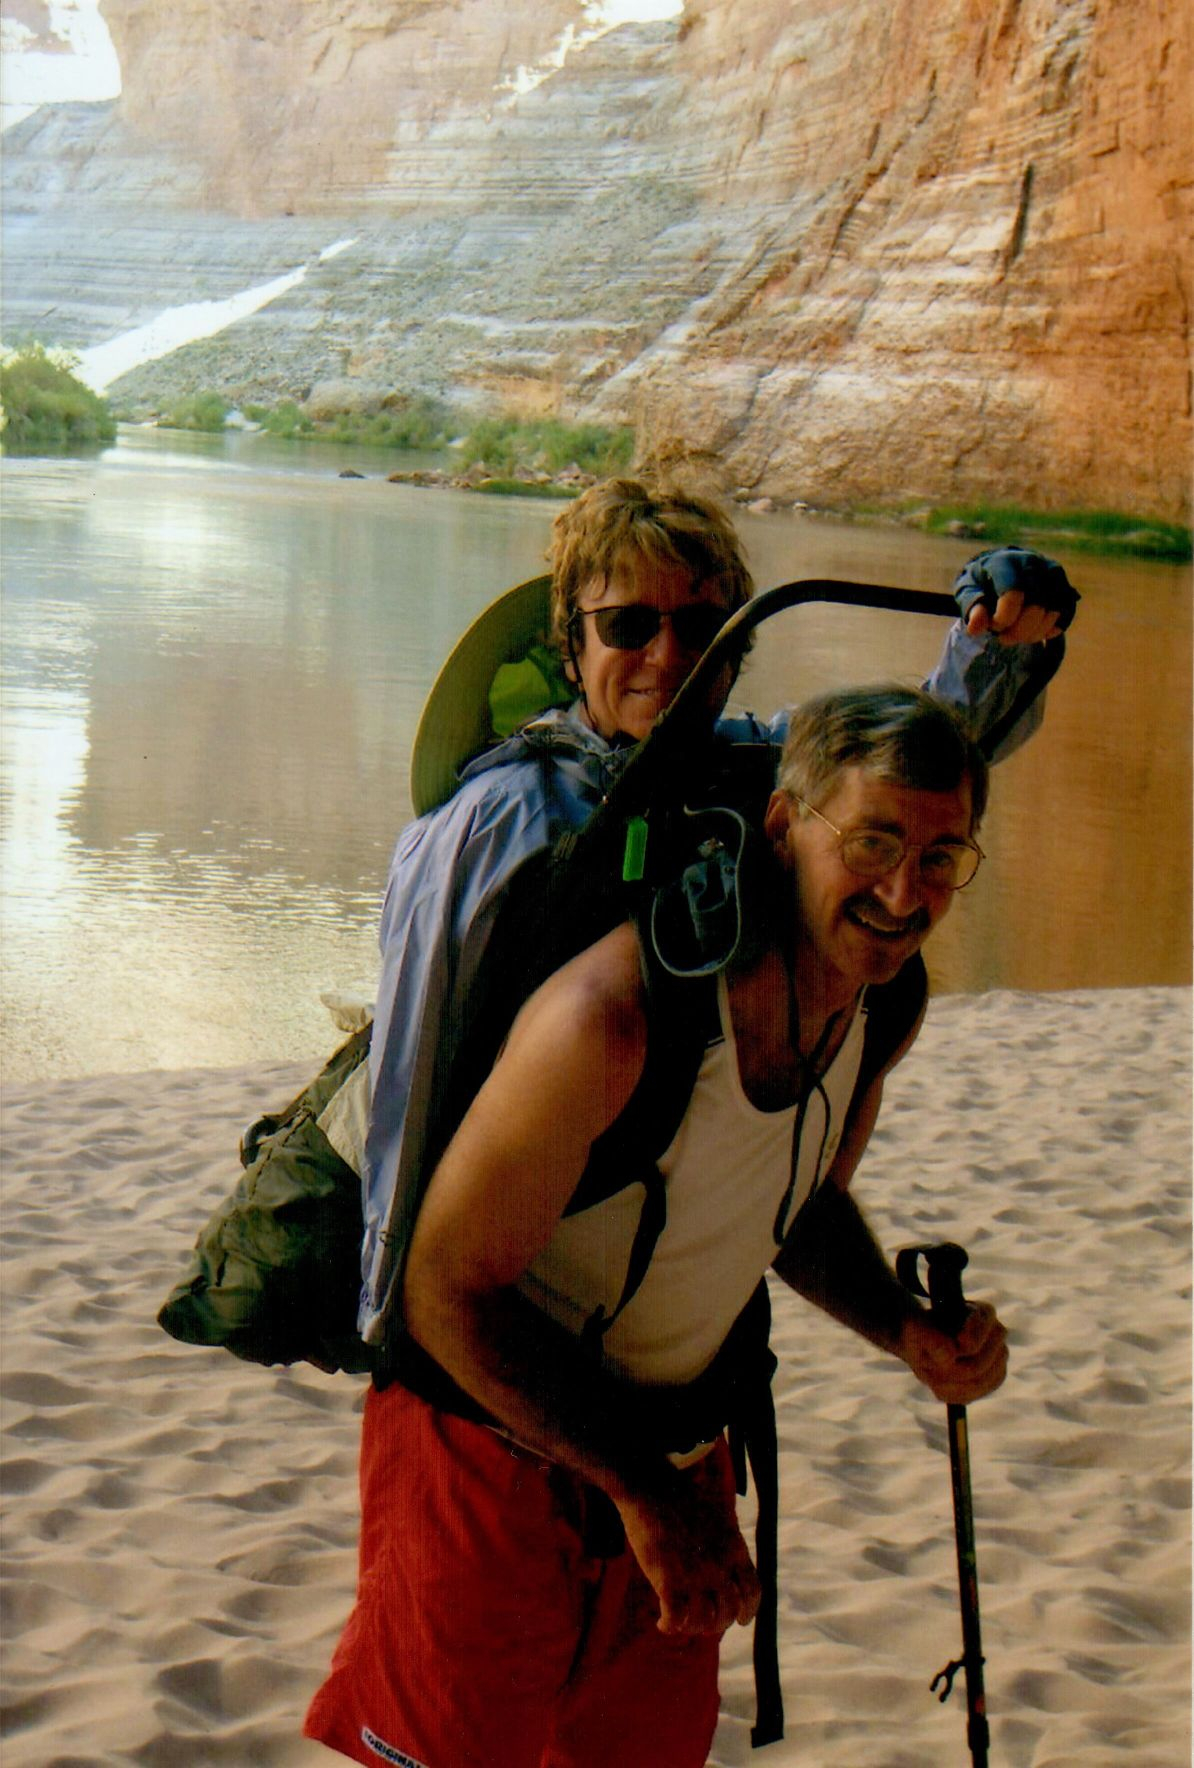 Dave carrying Linda Olson in backpack during 7-day river rafting trip in Grand Canyon.